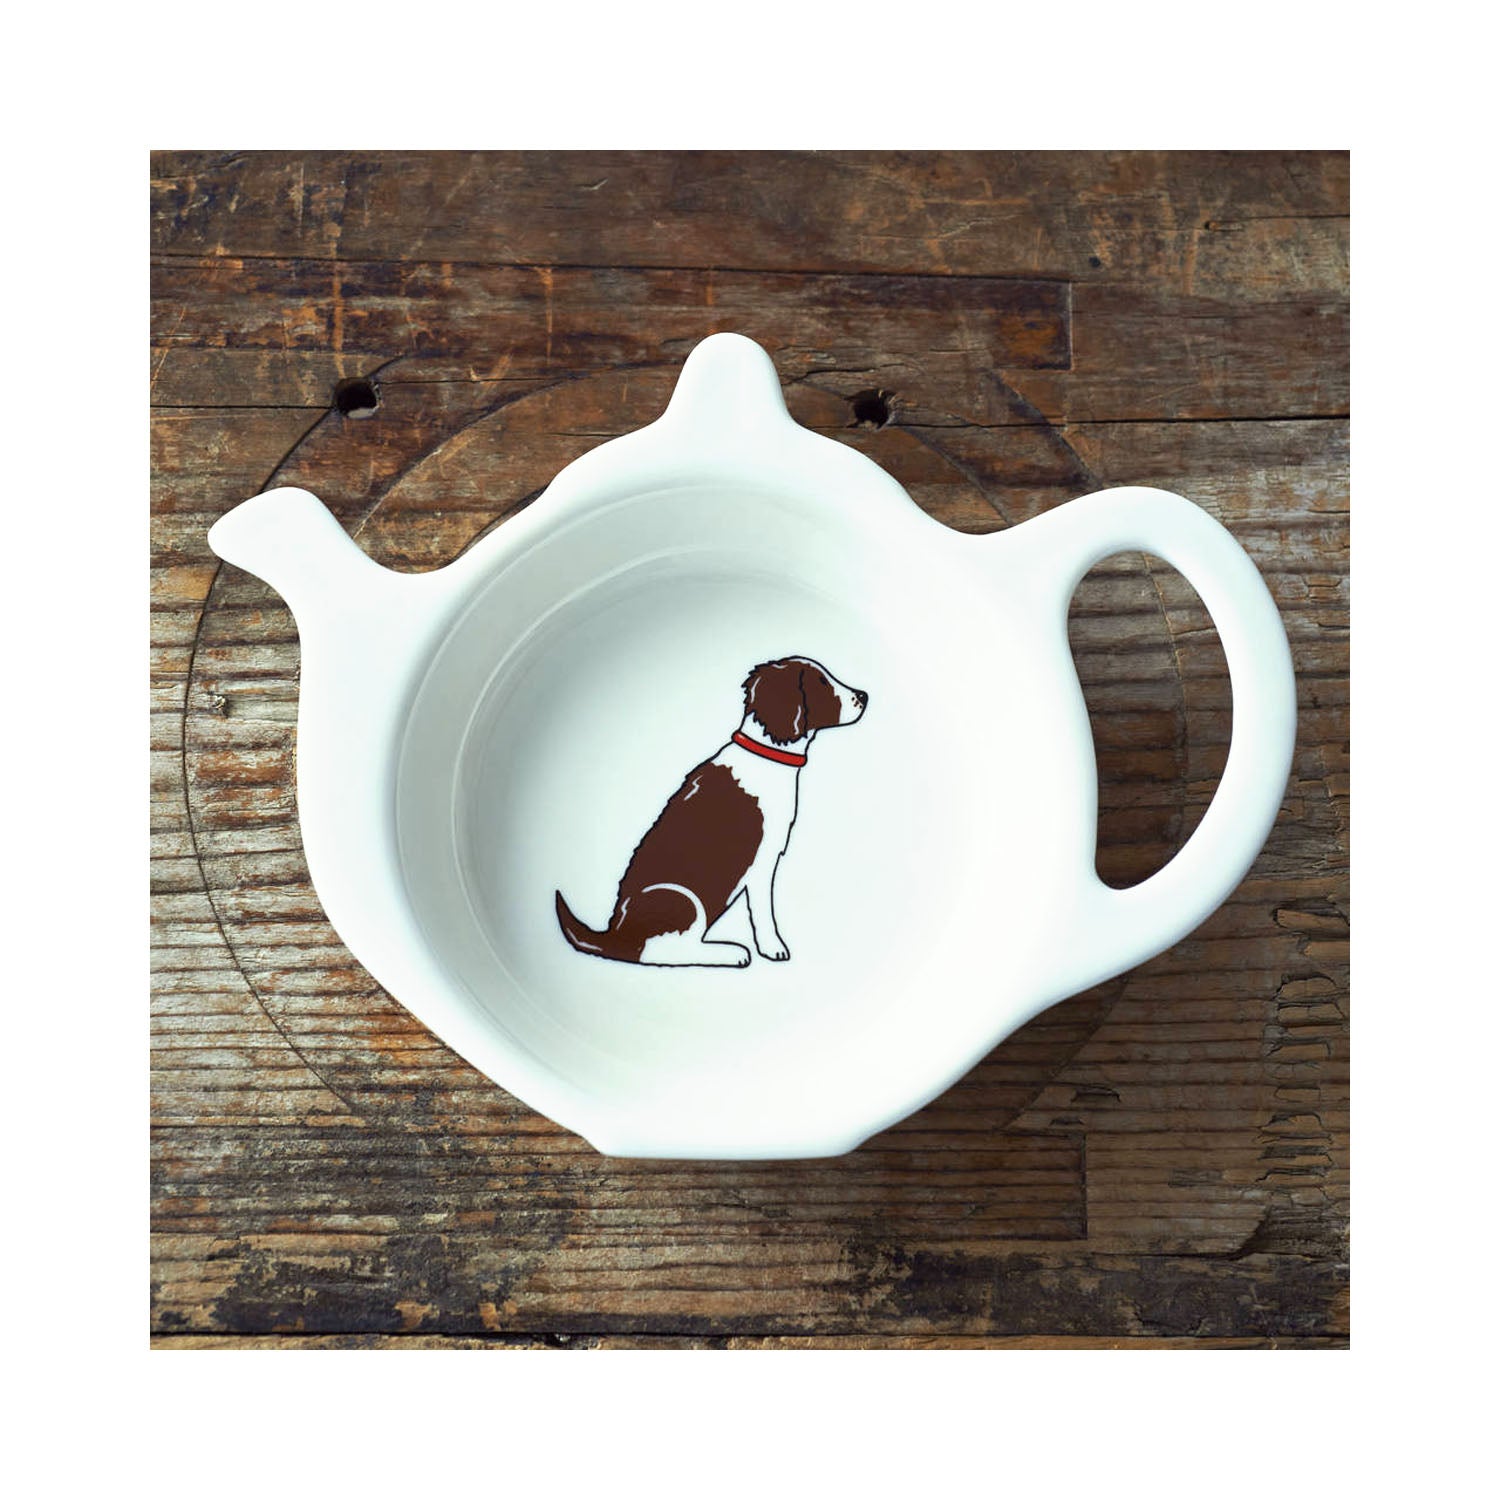 Dog Lover Gifts available at Dog Krazy Gifts - Gaby the Liver & White Springer Spaniel Teabag Dish - part of the Sweet William range available from Dog Krazy Gifts